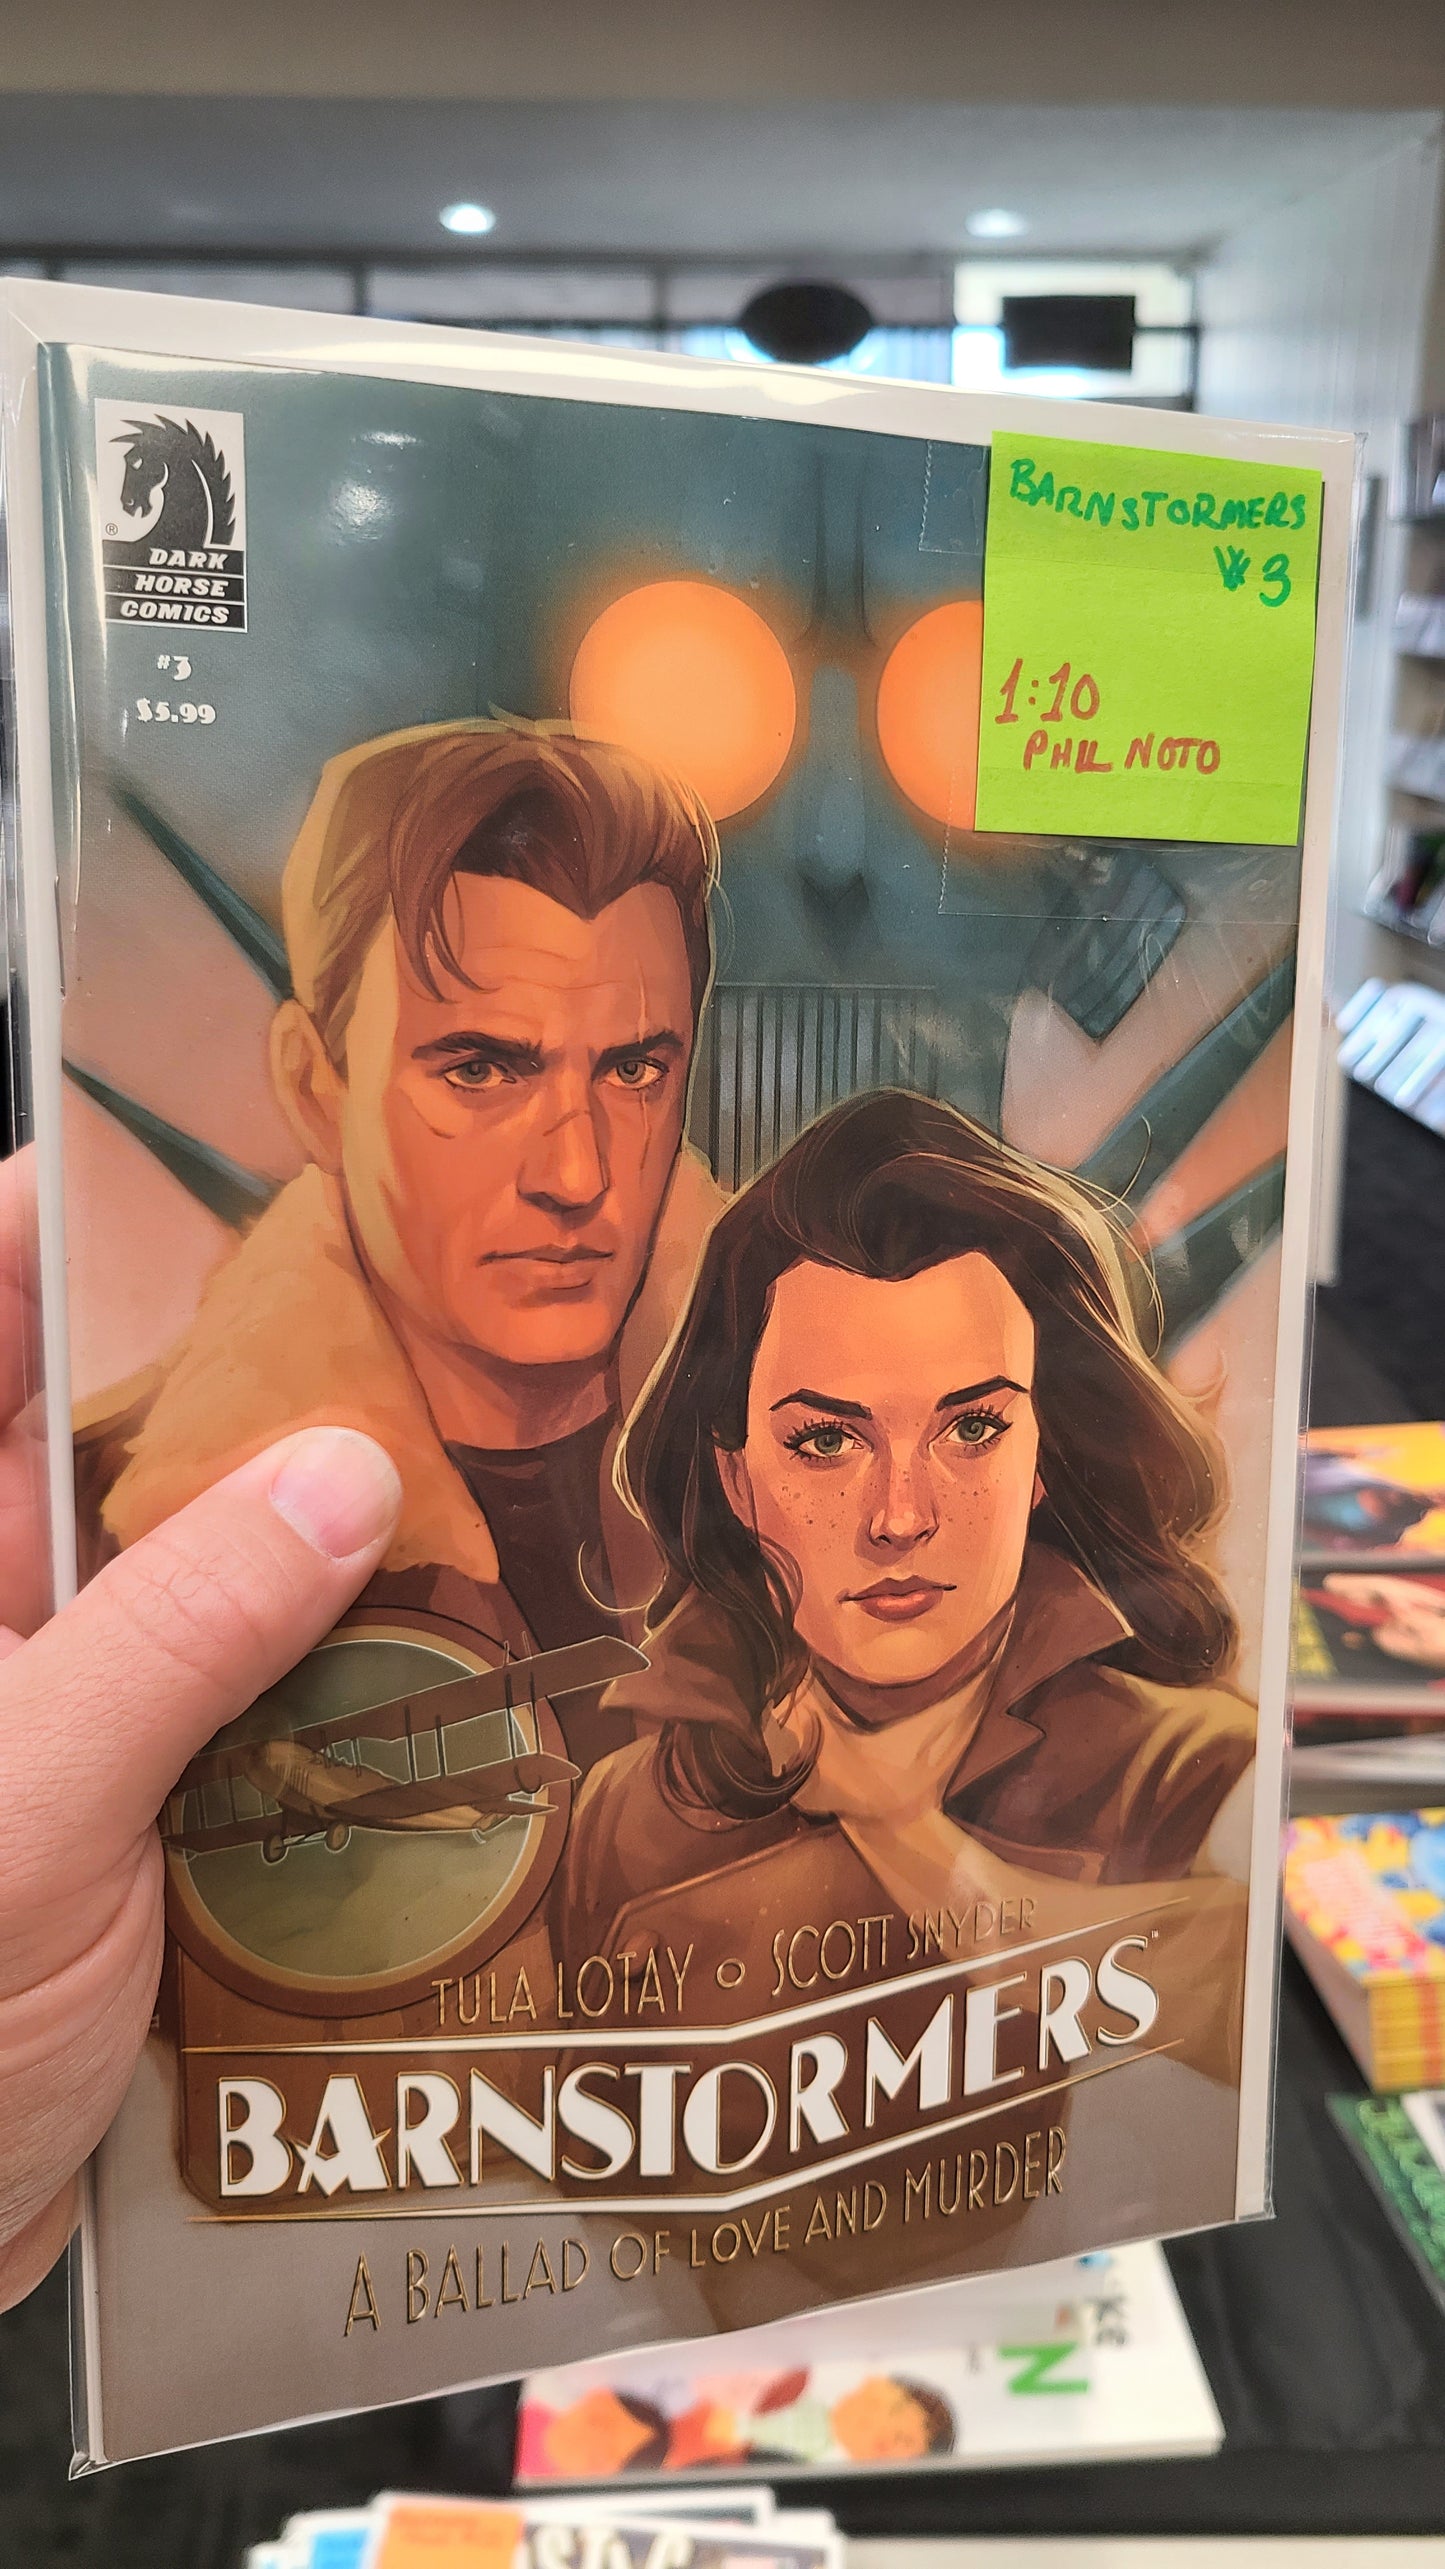 BARNSTORMERS #3 1:10 BY PHIL NOTO